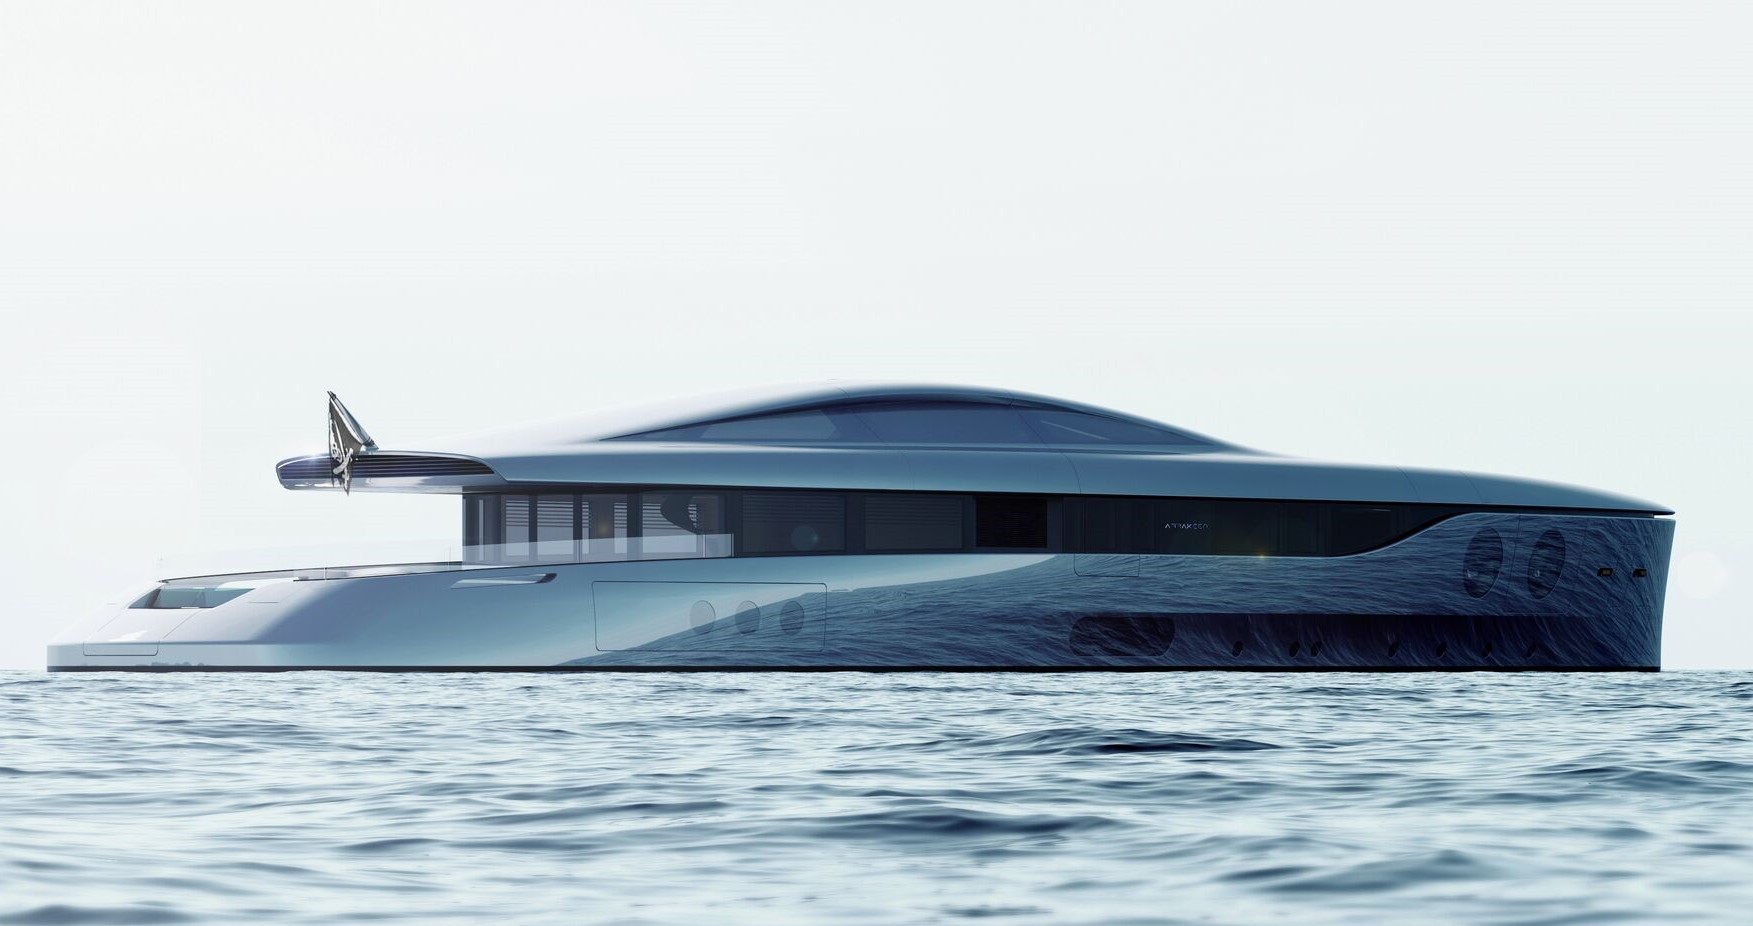 arrakeen is a retrofuturistic superyacht concept with gullwing doors and large portholes 5